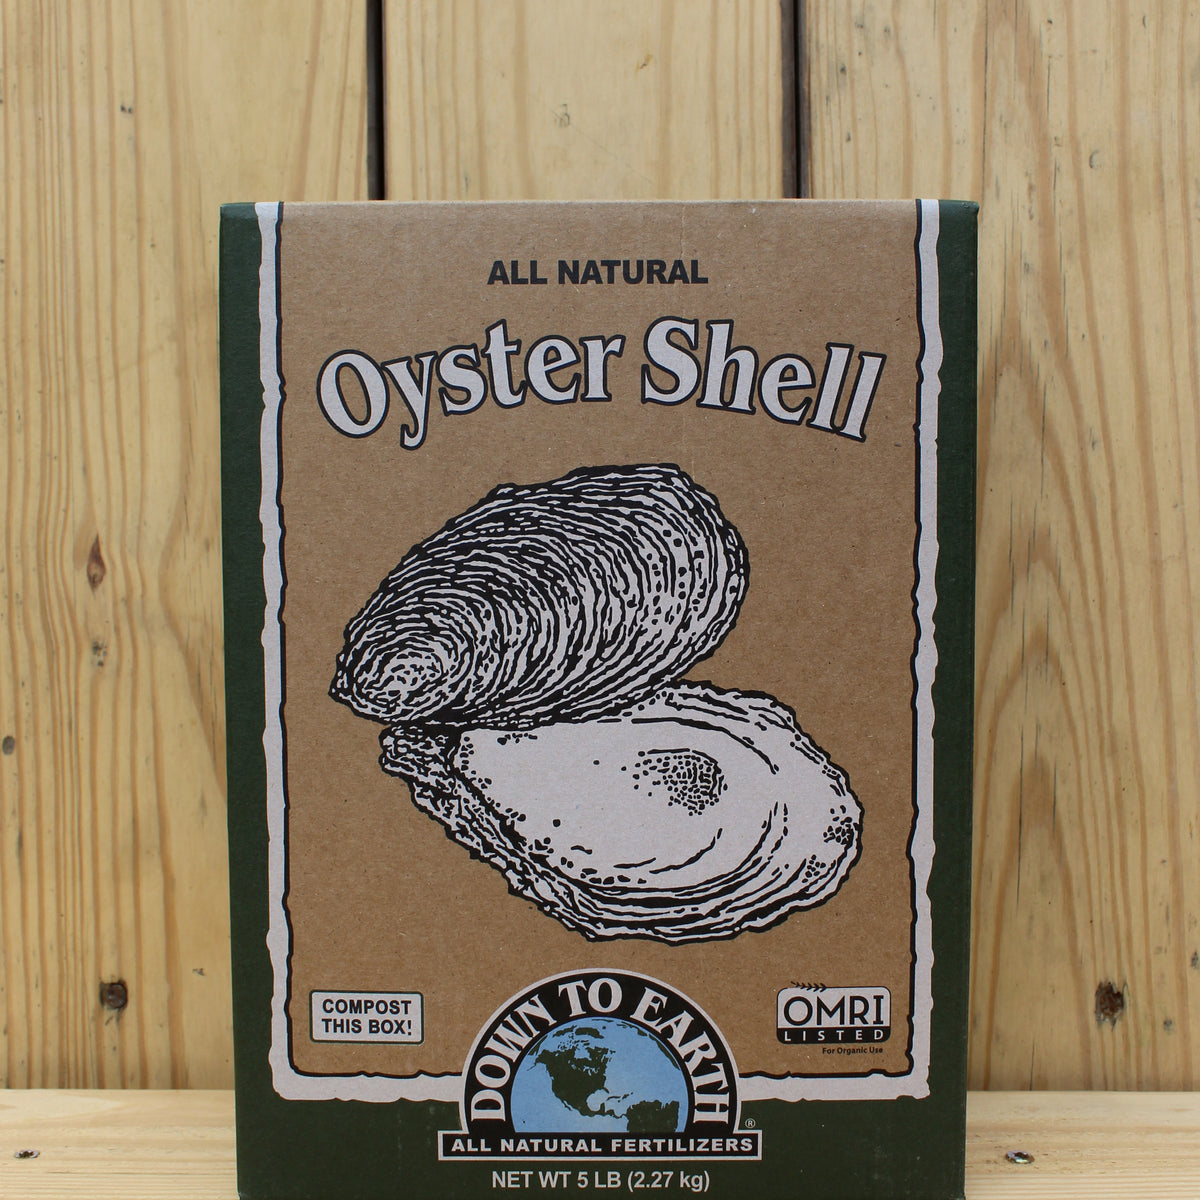 Oyster shells will give your soil a balanced boost, Gardens